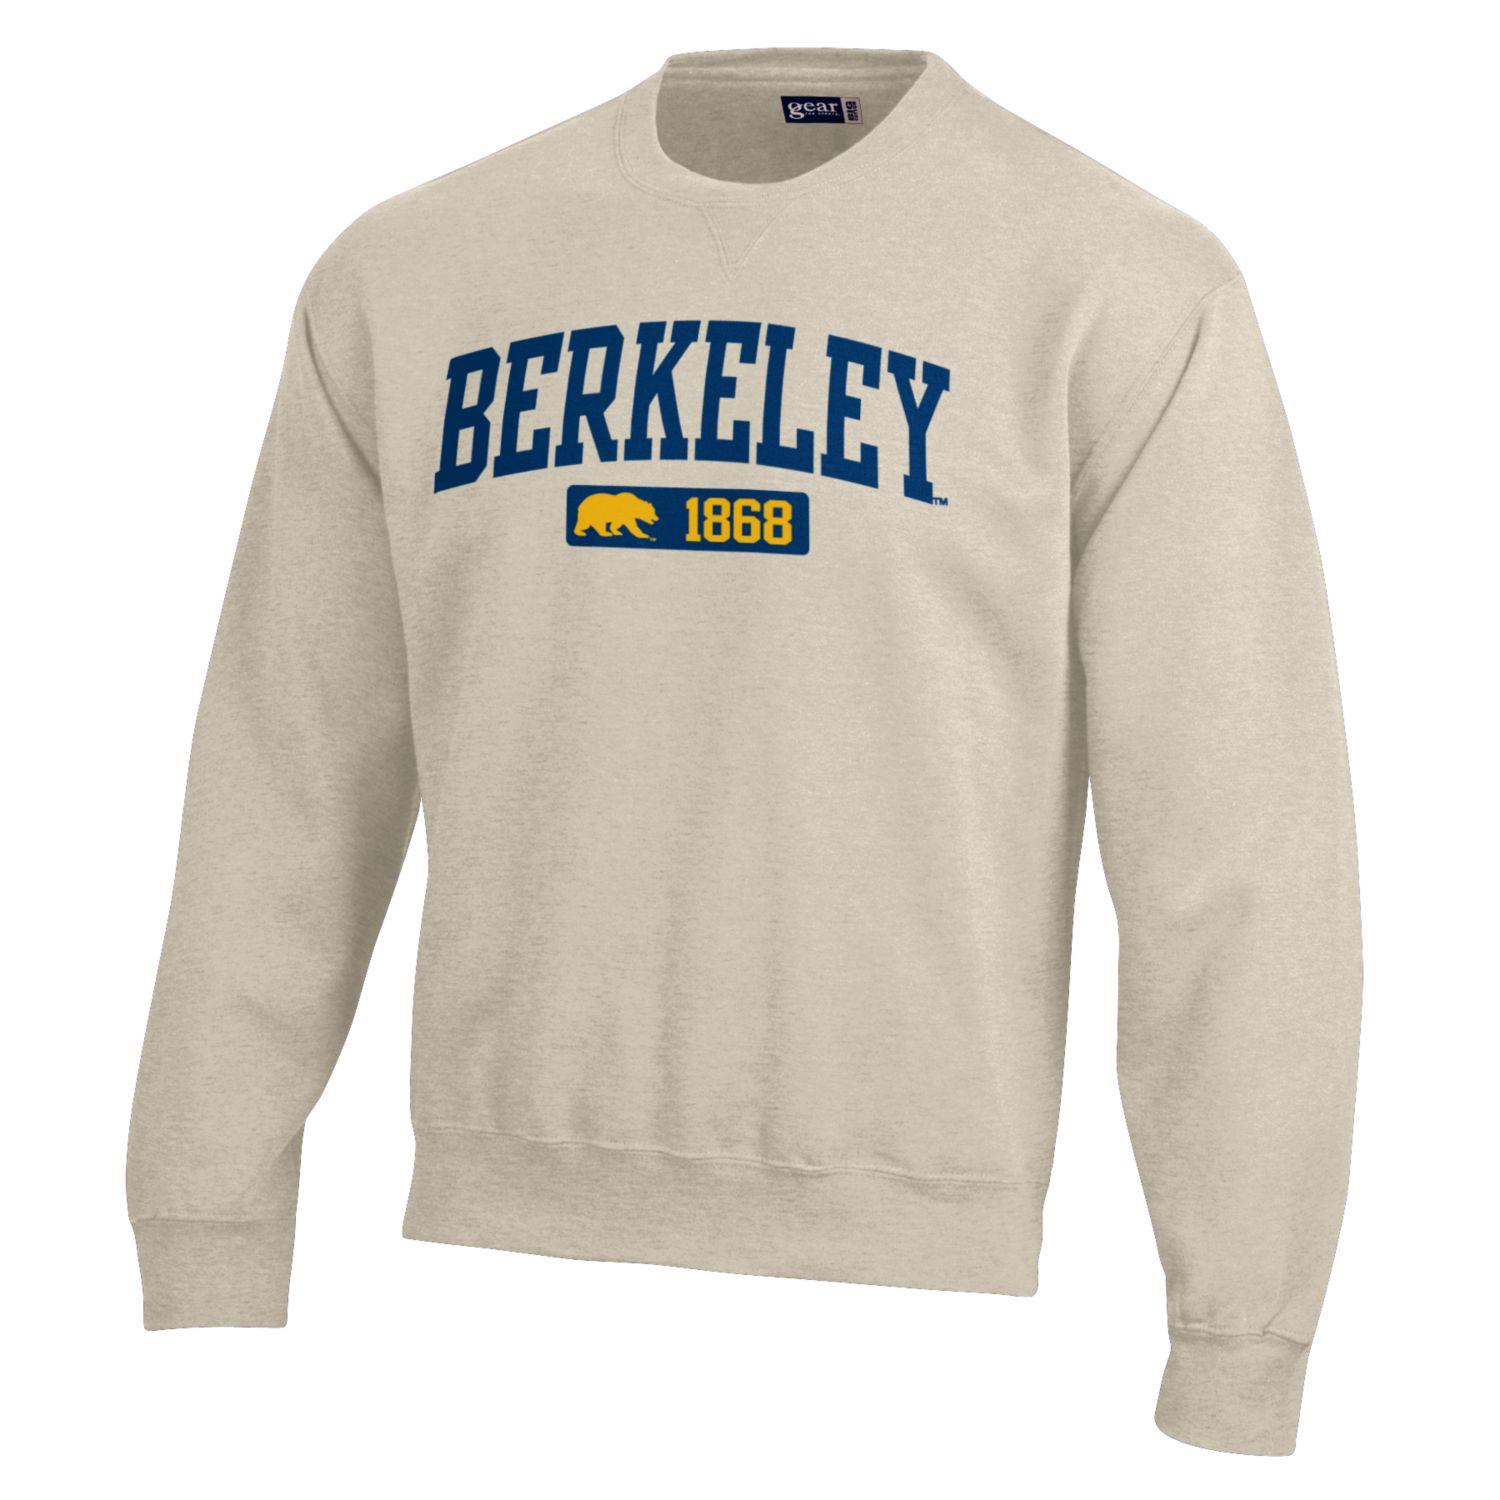 U.C. Berkeley Cal embroidered Big Cotton Gear for Sports crew-neck